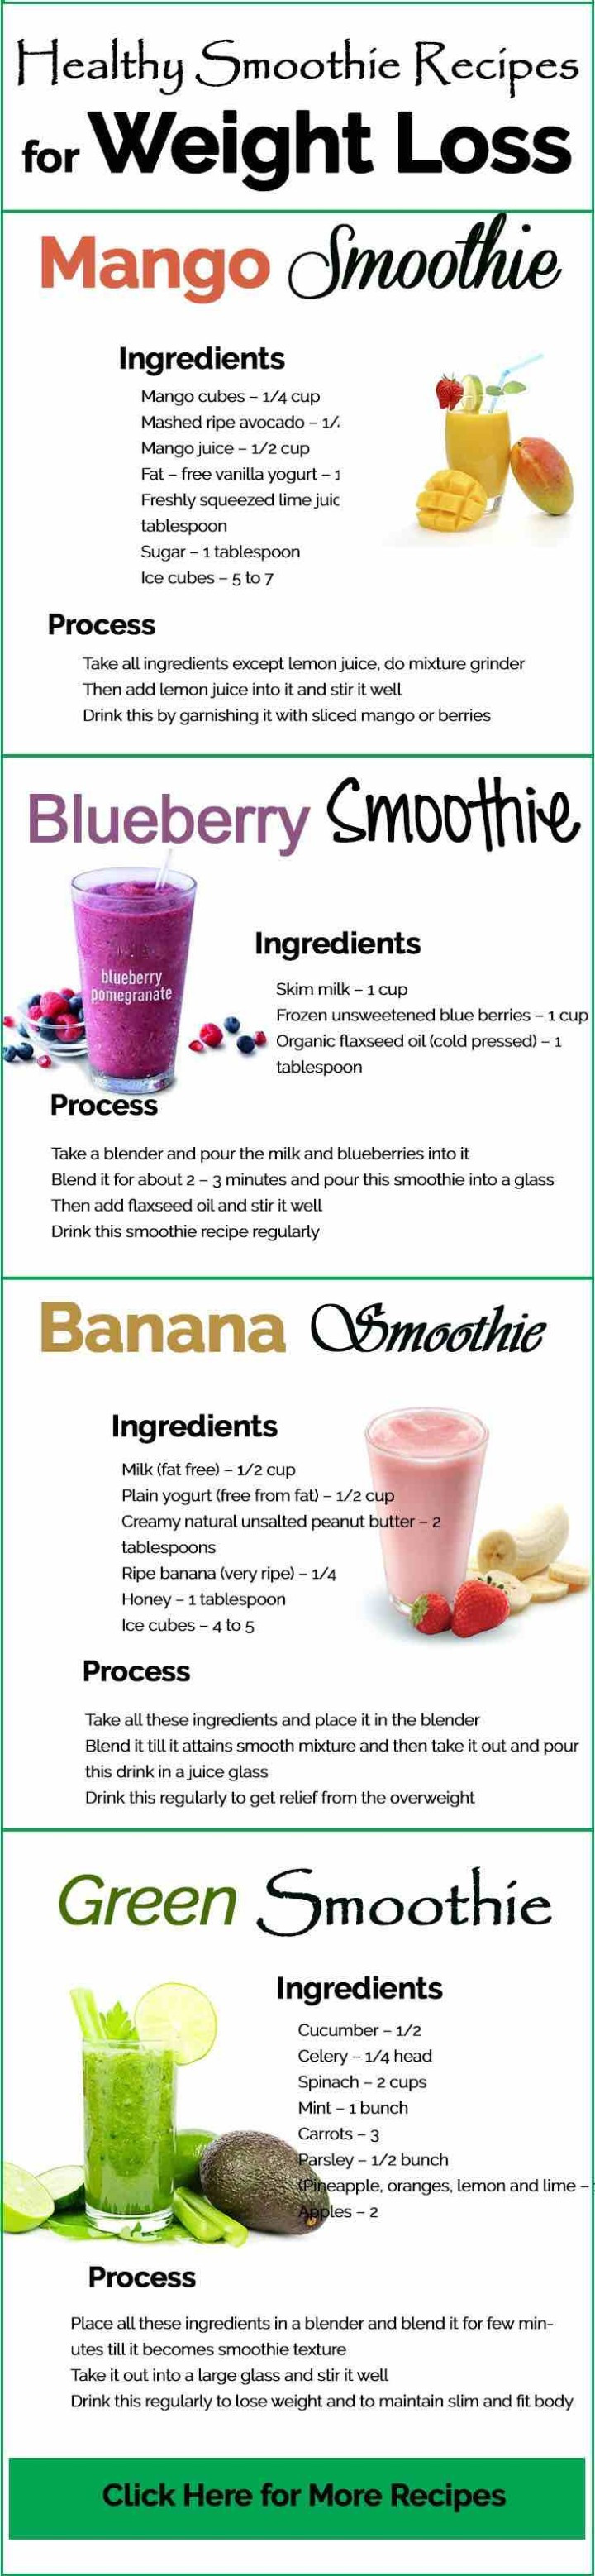 Healthy Green Smoothie Recipes For Weight Loss
 Juicing Recipes for Detoxing and Weight Loss MODwedding